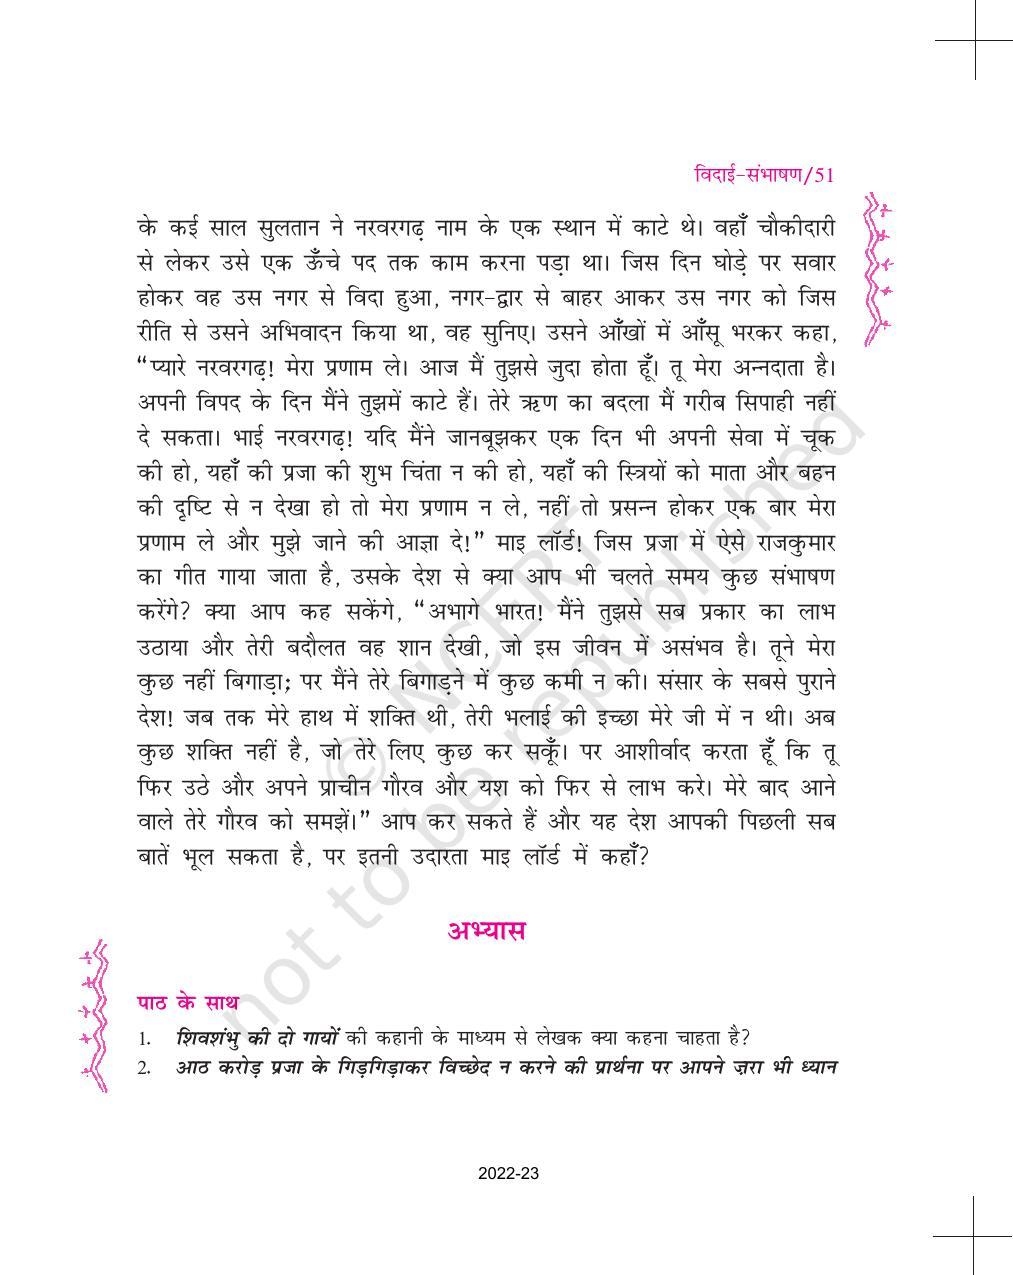 NCERT Book for Class 11 Hindi Aroh Chapter 4 विदाई – संभाषण - Page 8